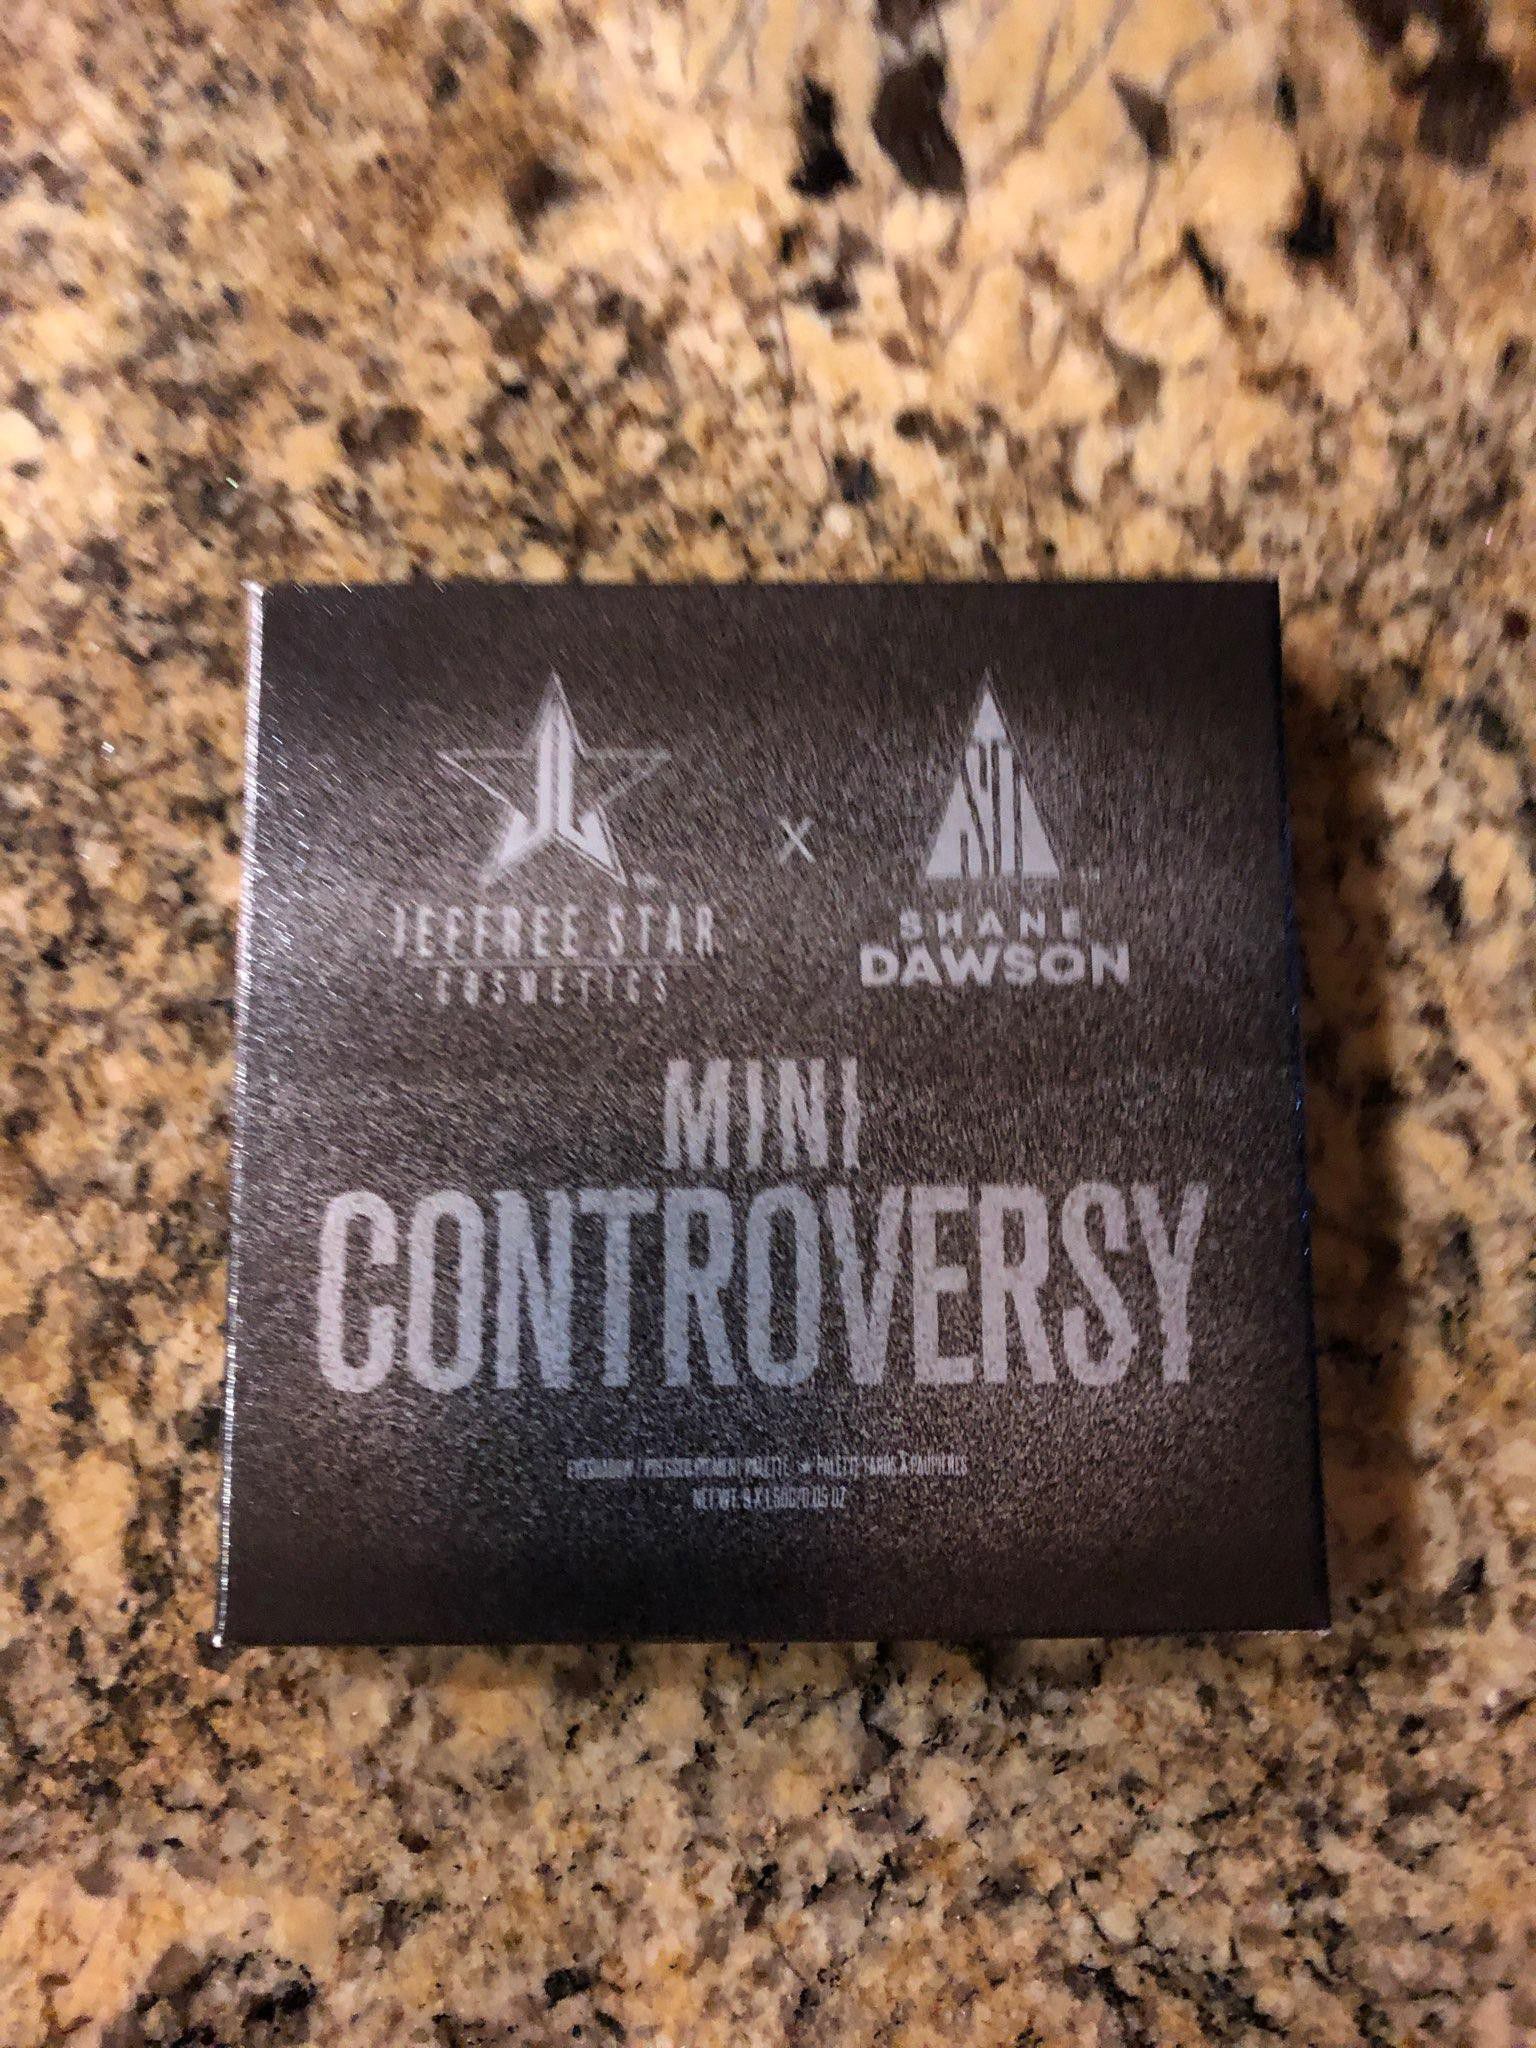 Mini Controversy and Conspiracy